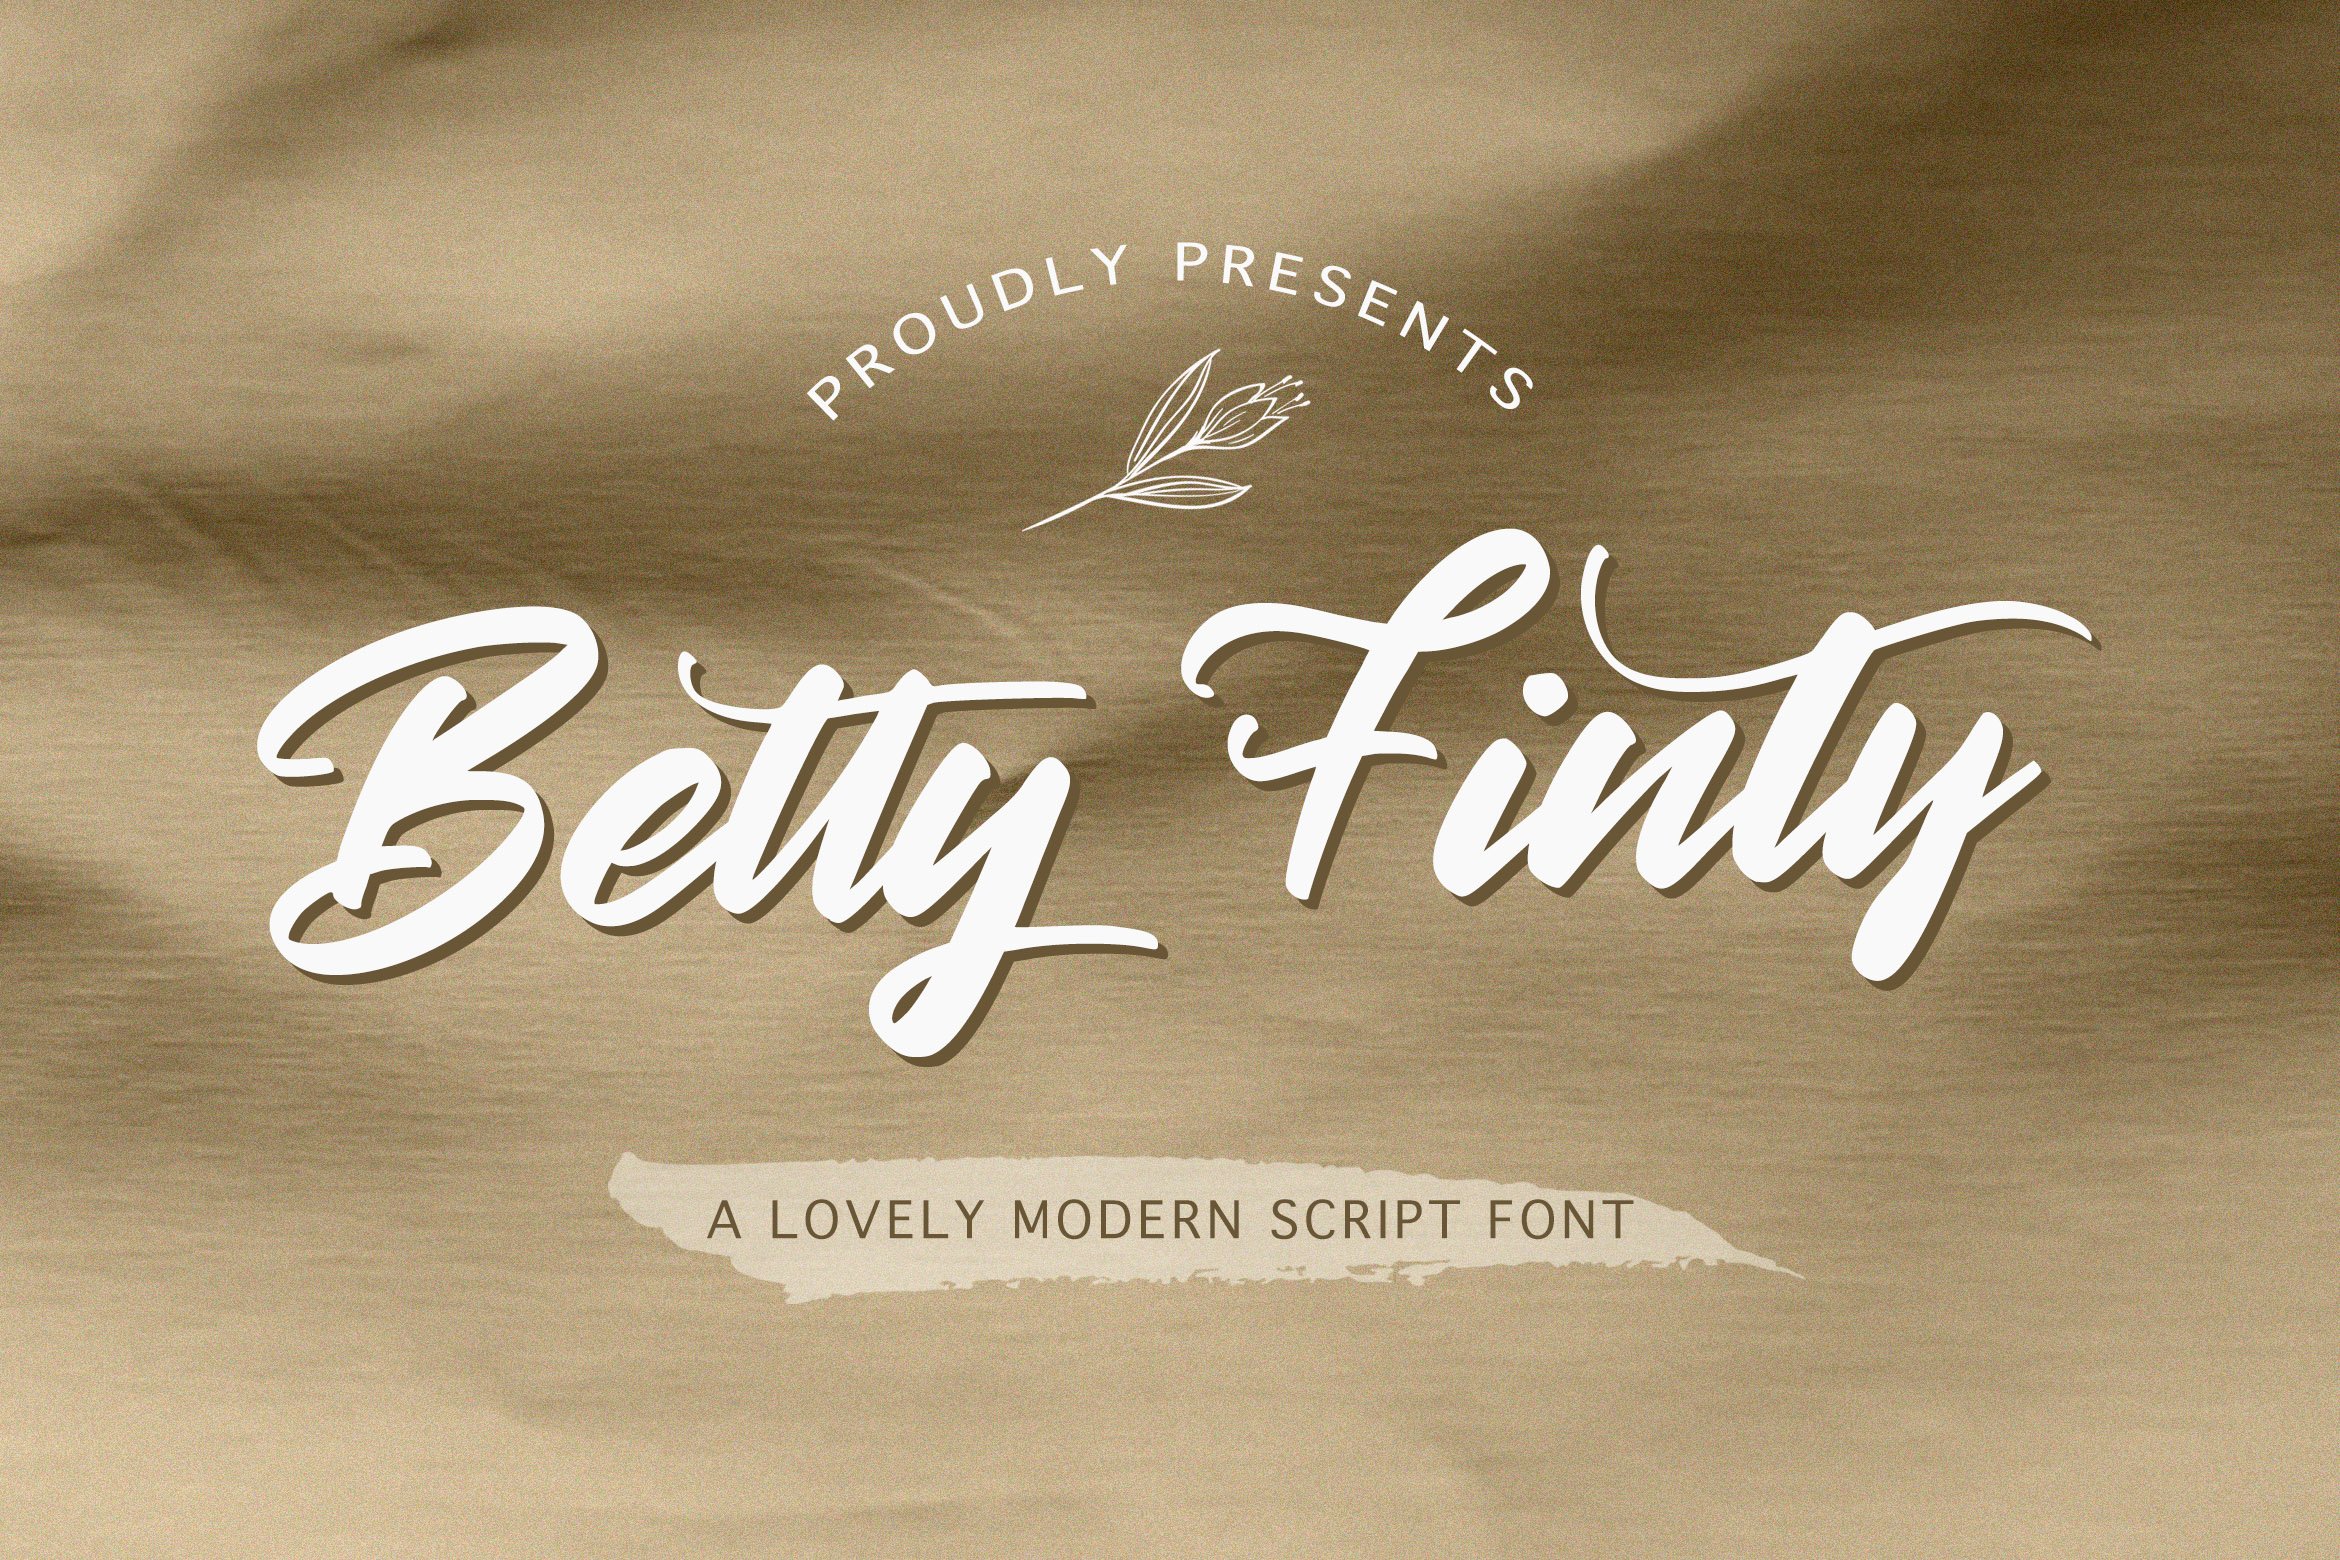 Betty Finty - Modern Script Font cover image.